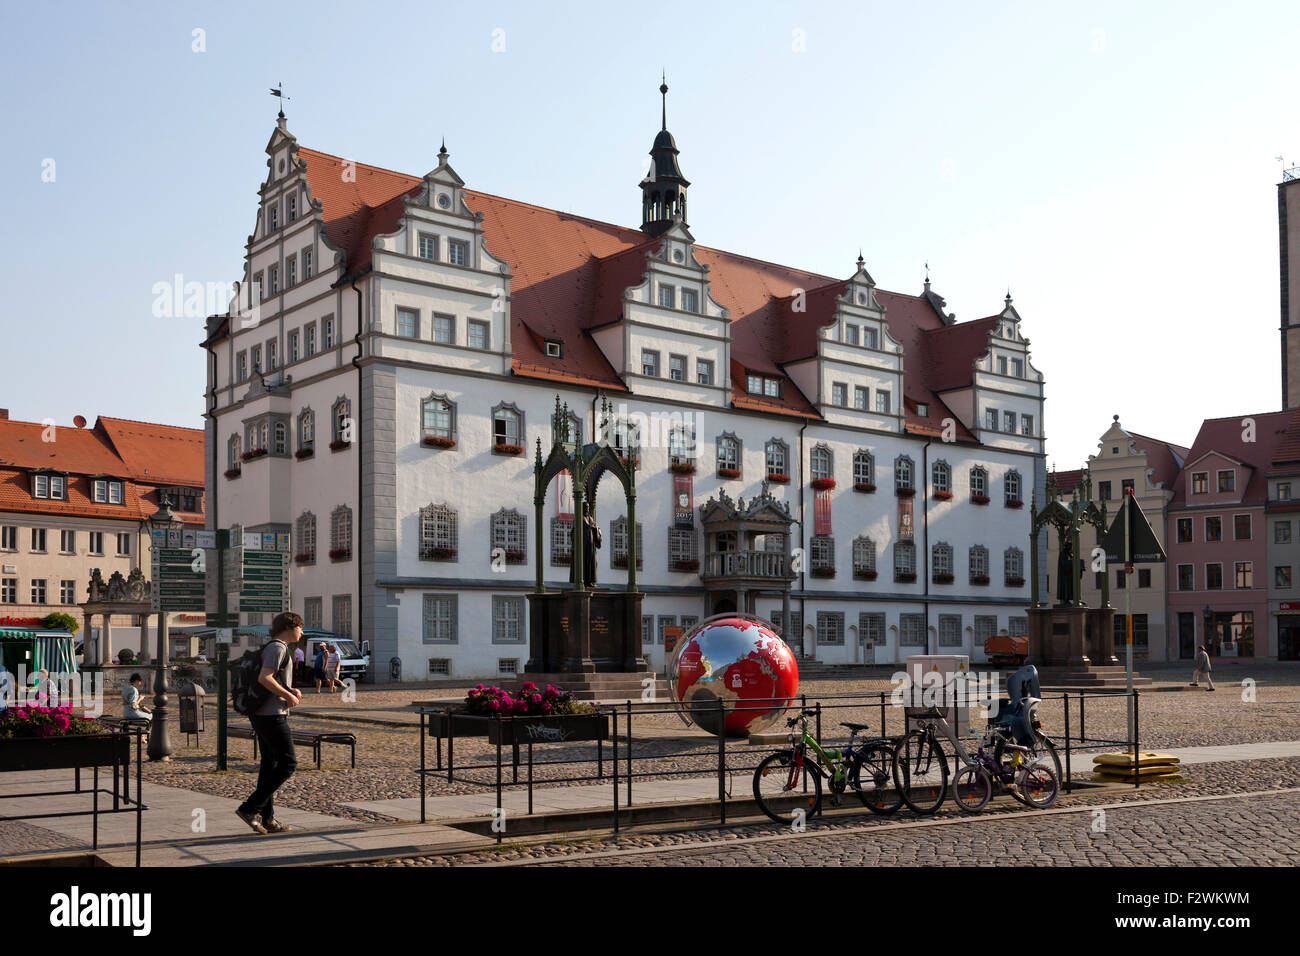 Market square with ancient town hall,  Lutherstadt Wittenberg, Saxony-Anhalt, Germany Stock Photo